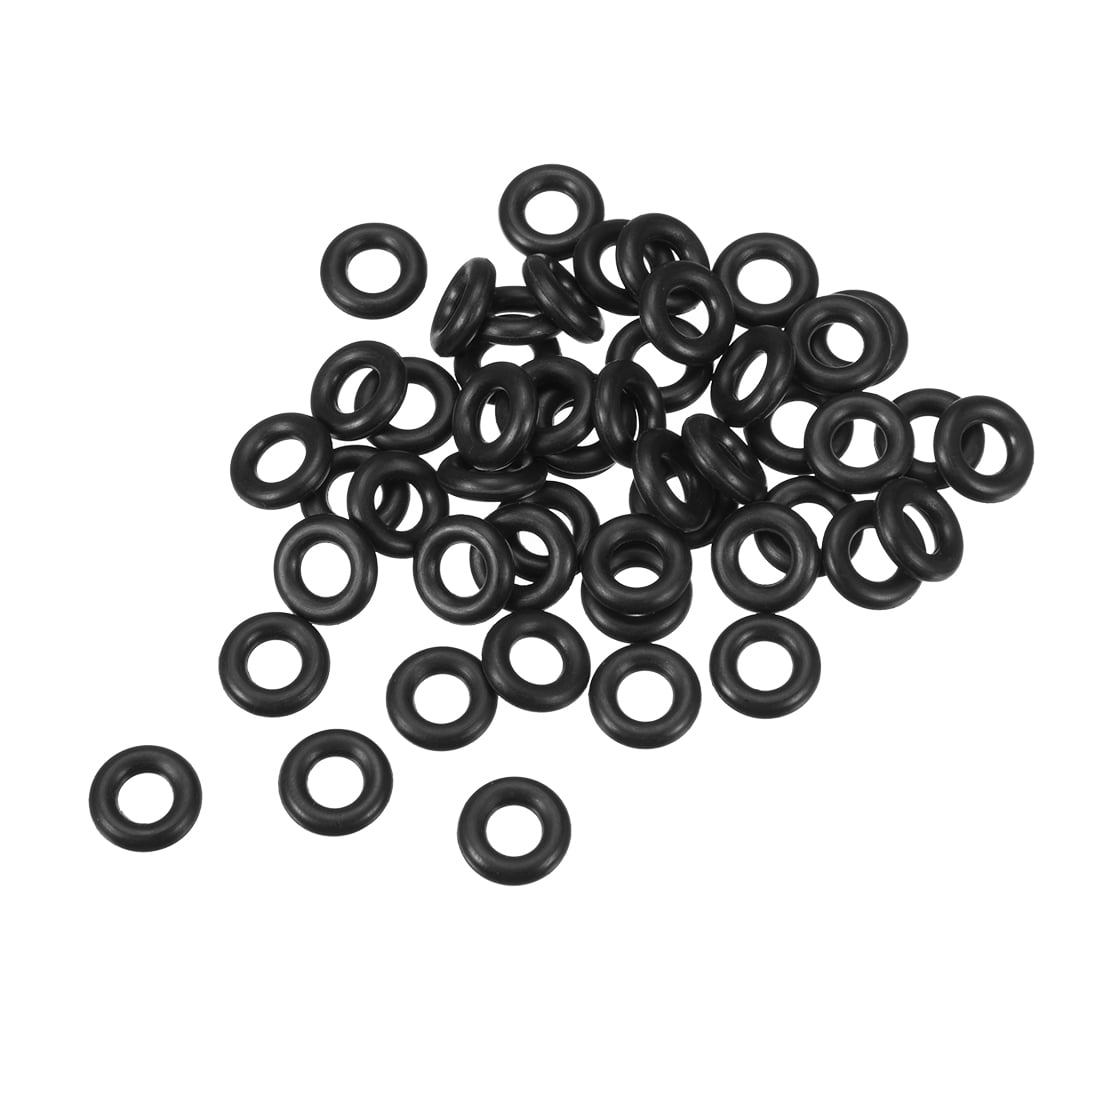 Whole House O-Ring Replacement Kit – 5.5” OD Diameter O-Rings for